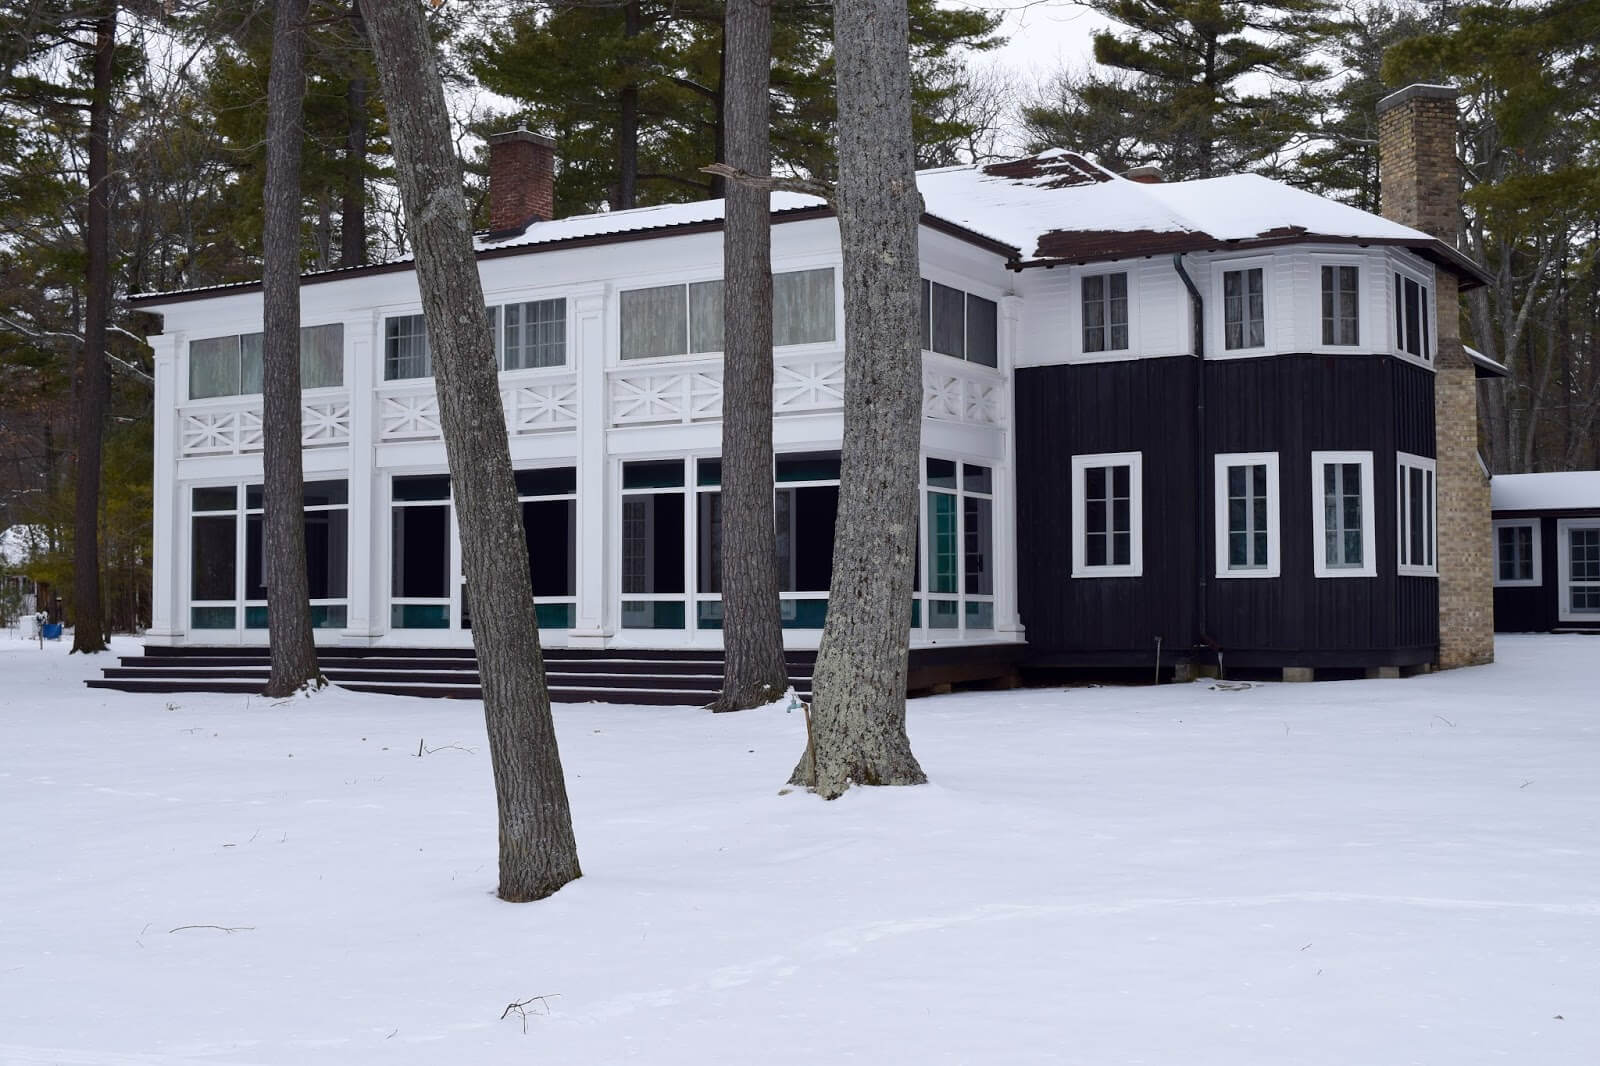 A large cottage from the Edwardian era at Sturgeon Point on Lake Avenue in the winter